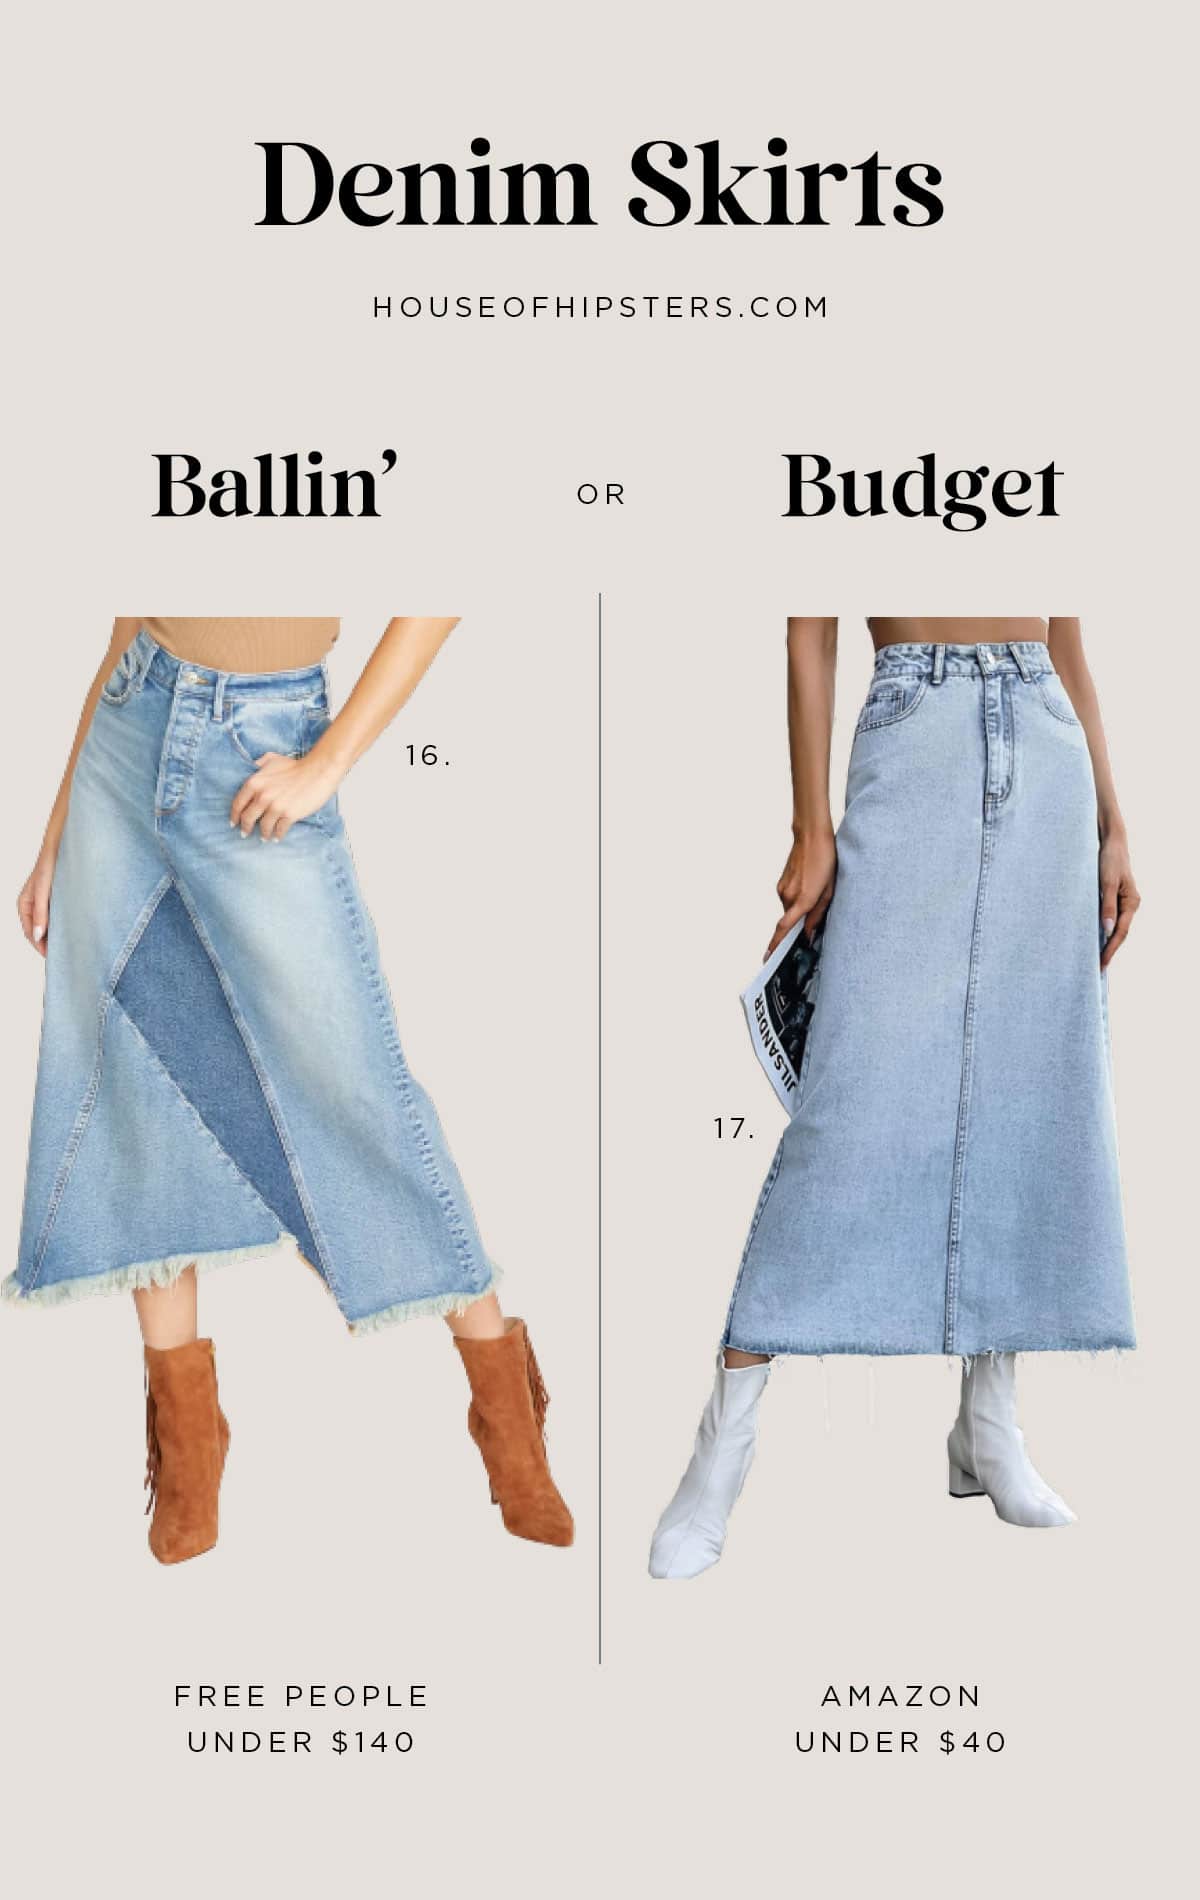 Get the Look For Less on a Long Denim Skirt - High low look for less with this midi denim skirt from Free People or this affordable maxi skirt from Amazon!